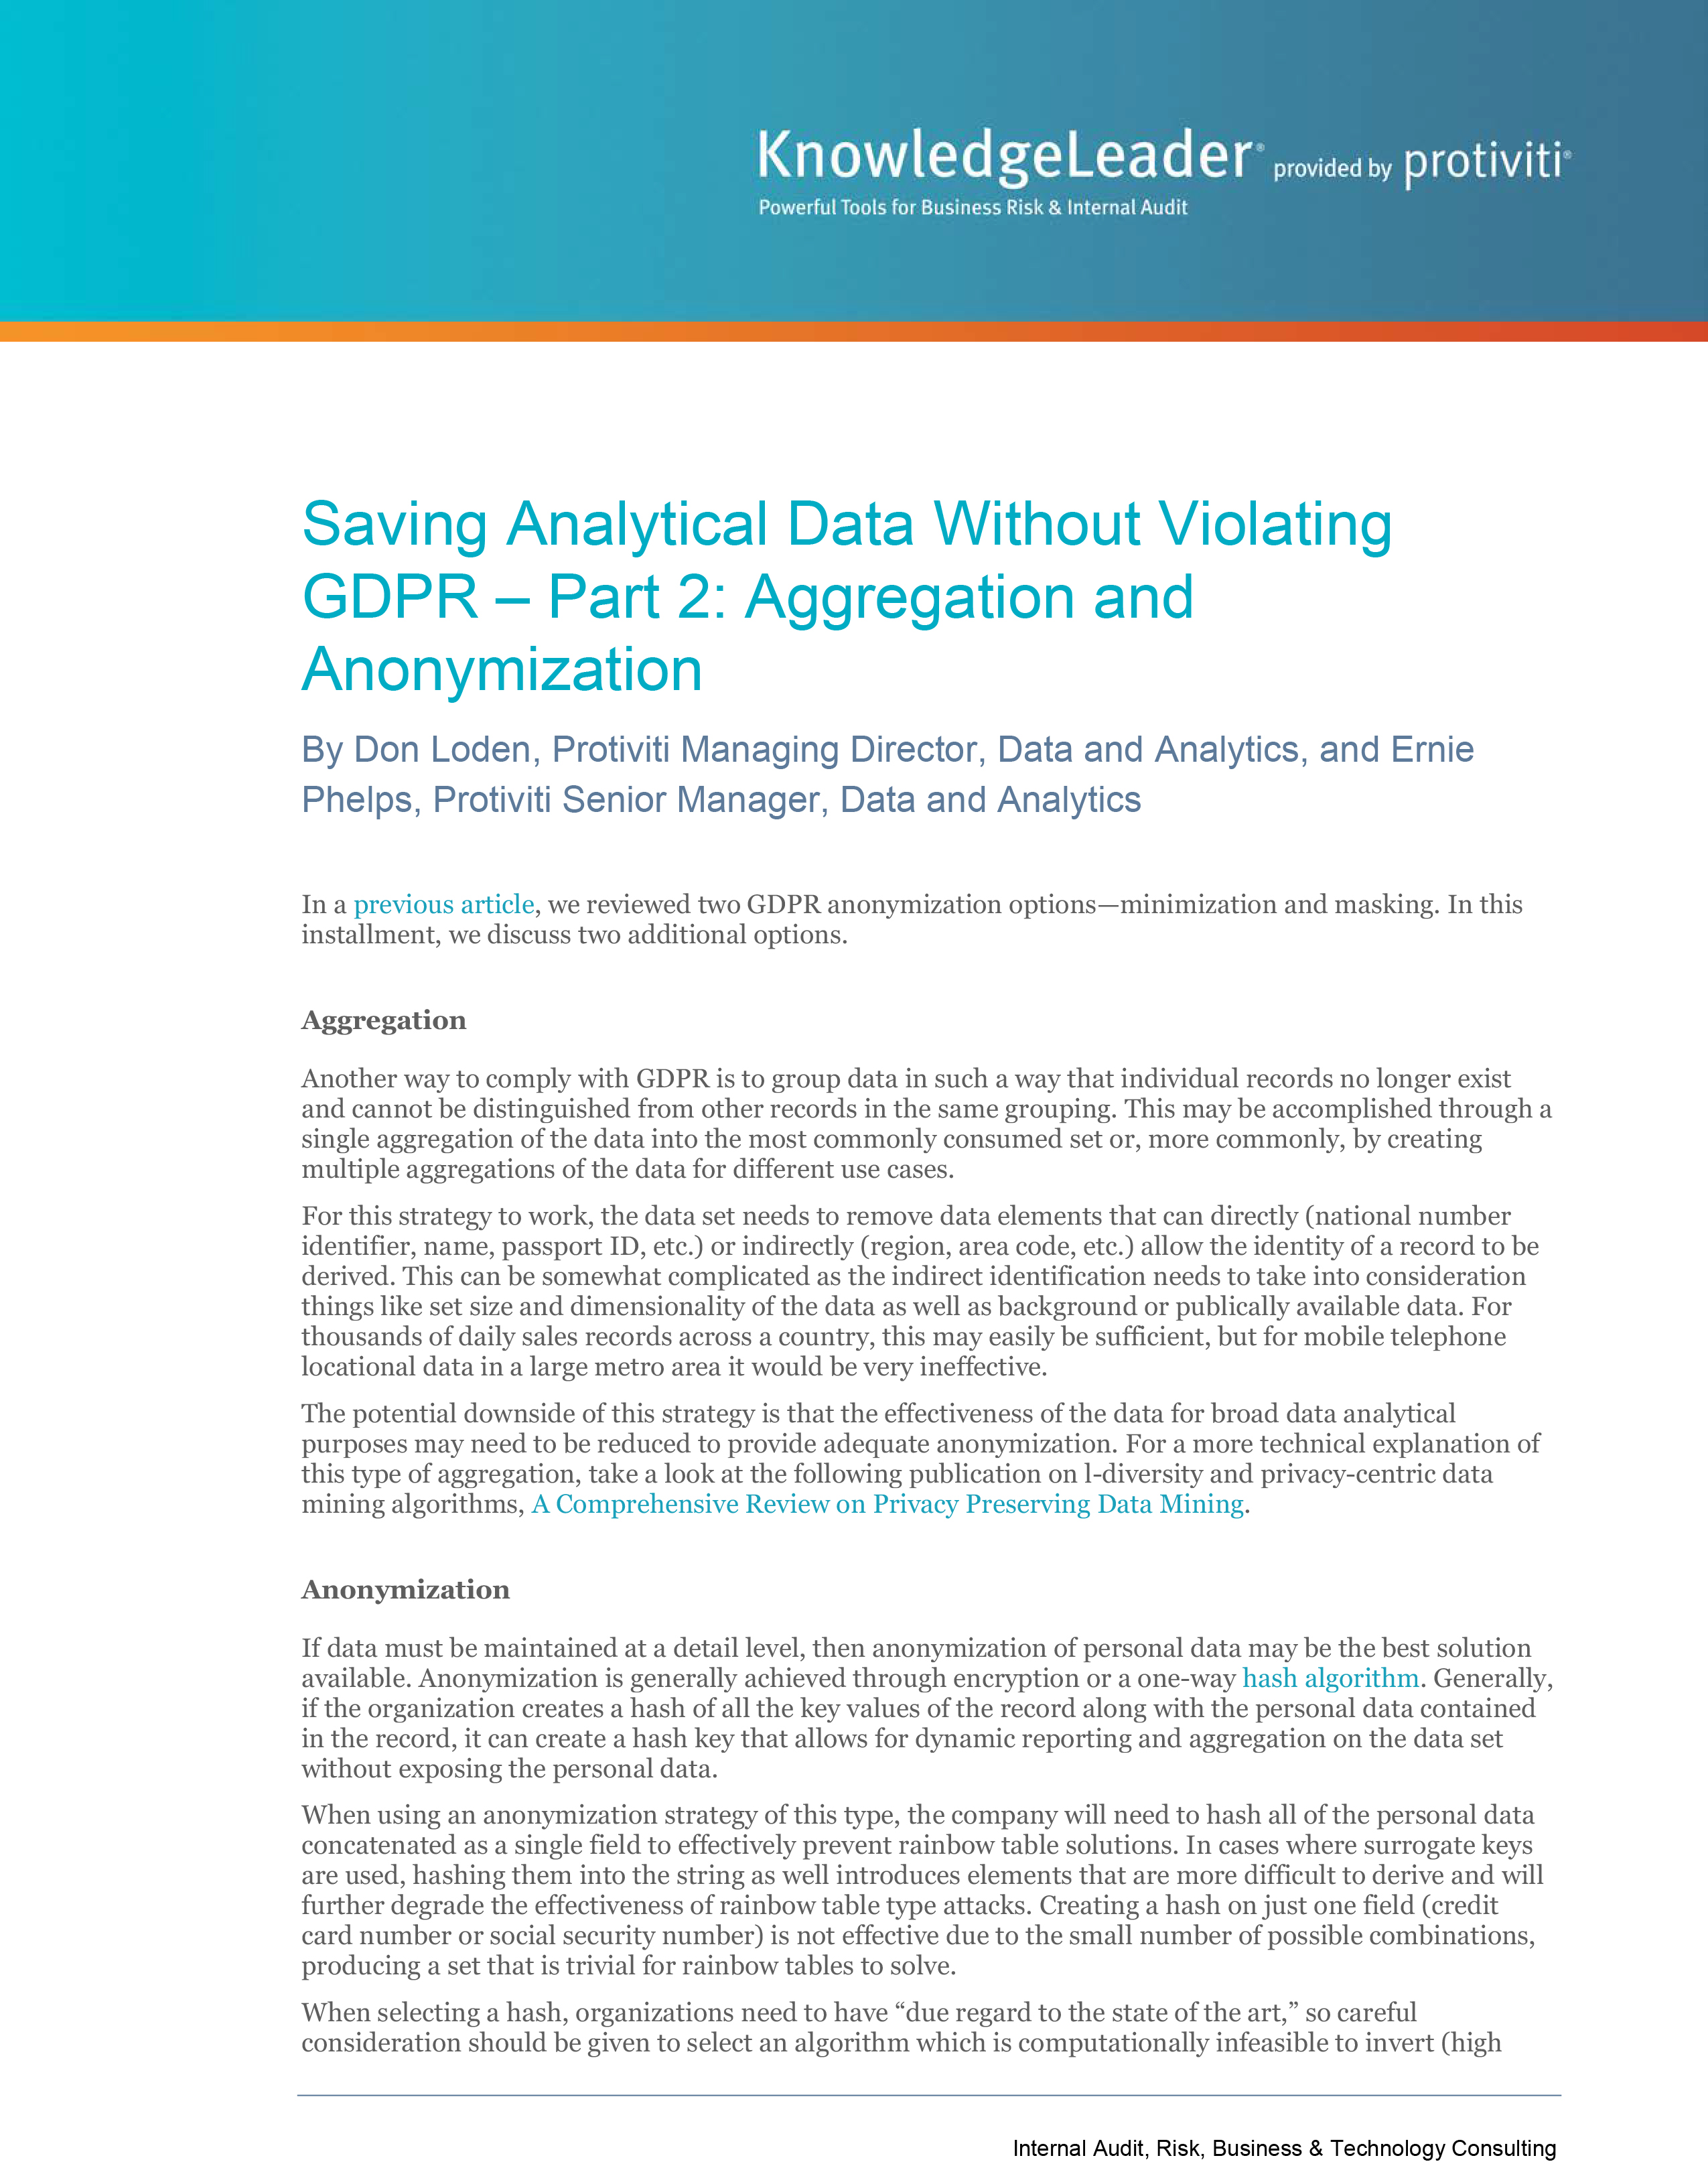 Screenshot of the first page of Saving Analytical Data Without Violating GDPR – Part 2 Aggregation and Anonymization